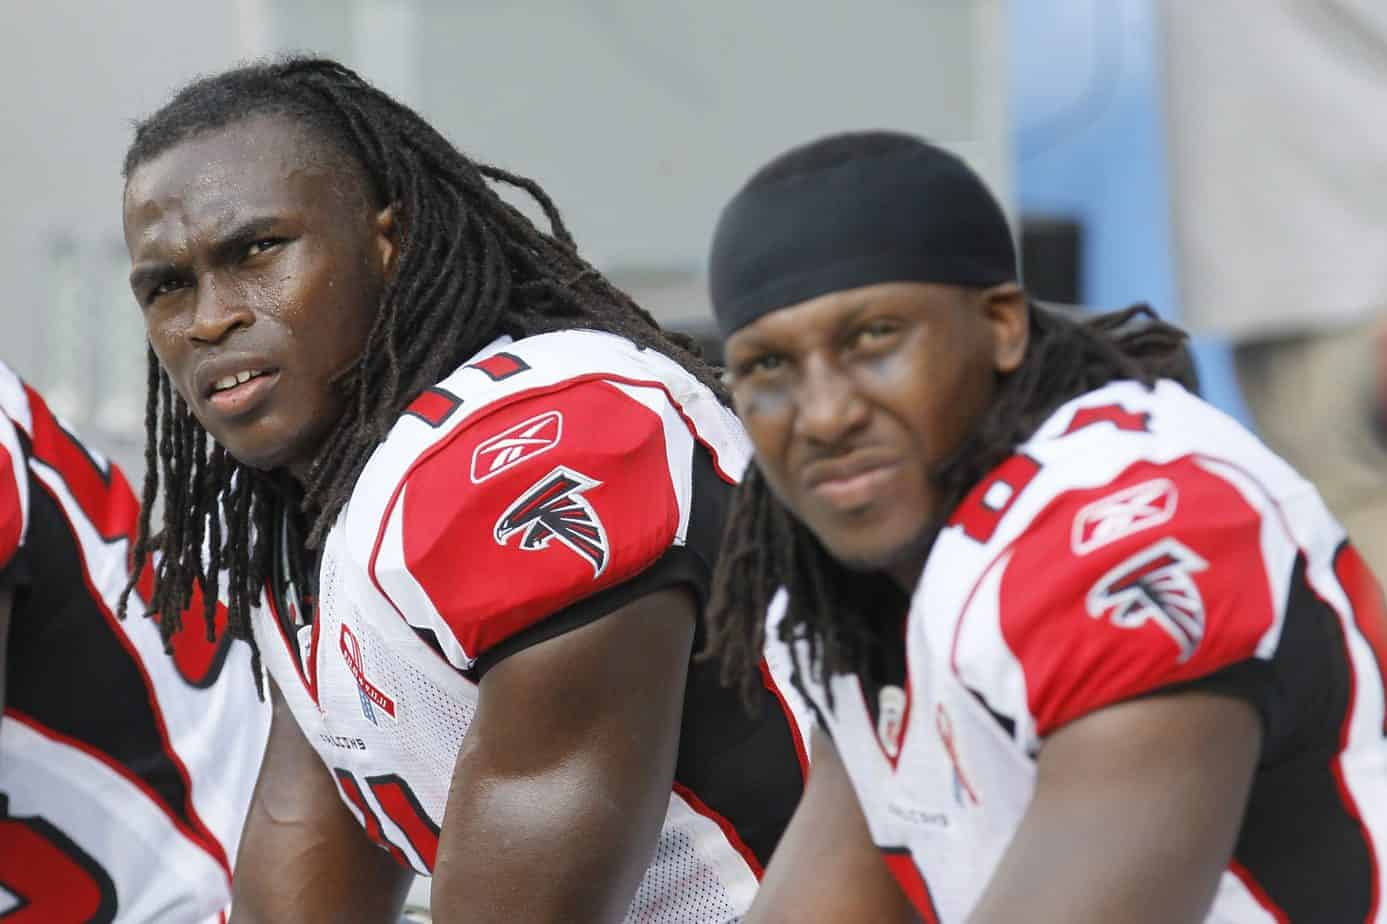 Former Atlanta Falcons star receivers Julio Jones and Roddy White are reportedly being sued for laundering after selling a whole bunch of weed